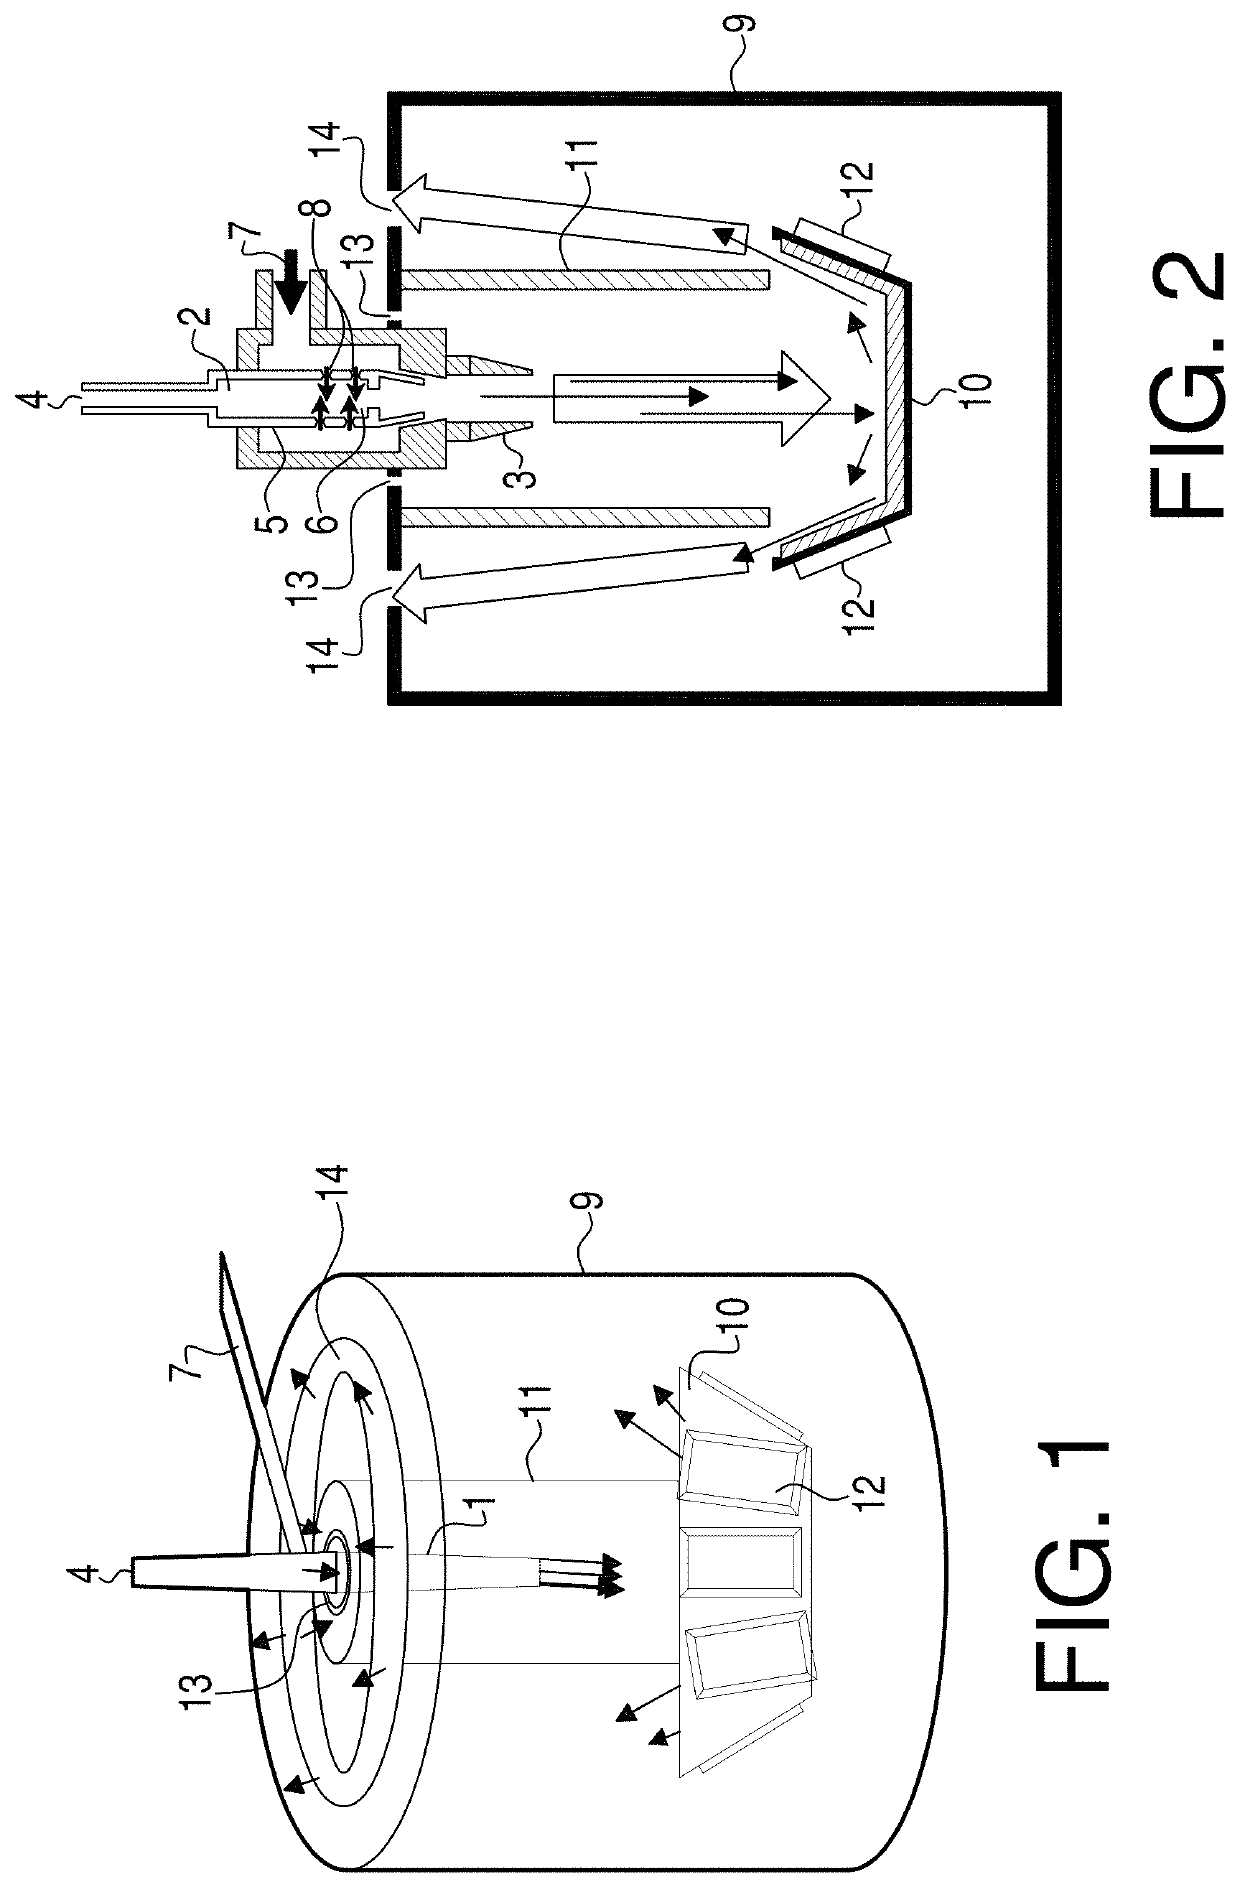 Process and apparatus for quantifying solid residue on a substrate